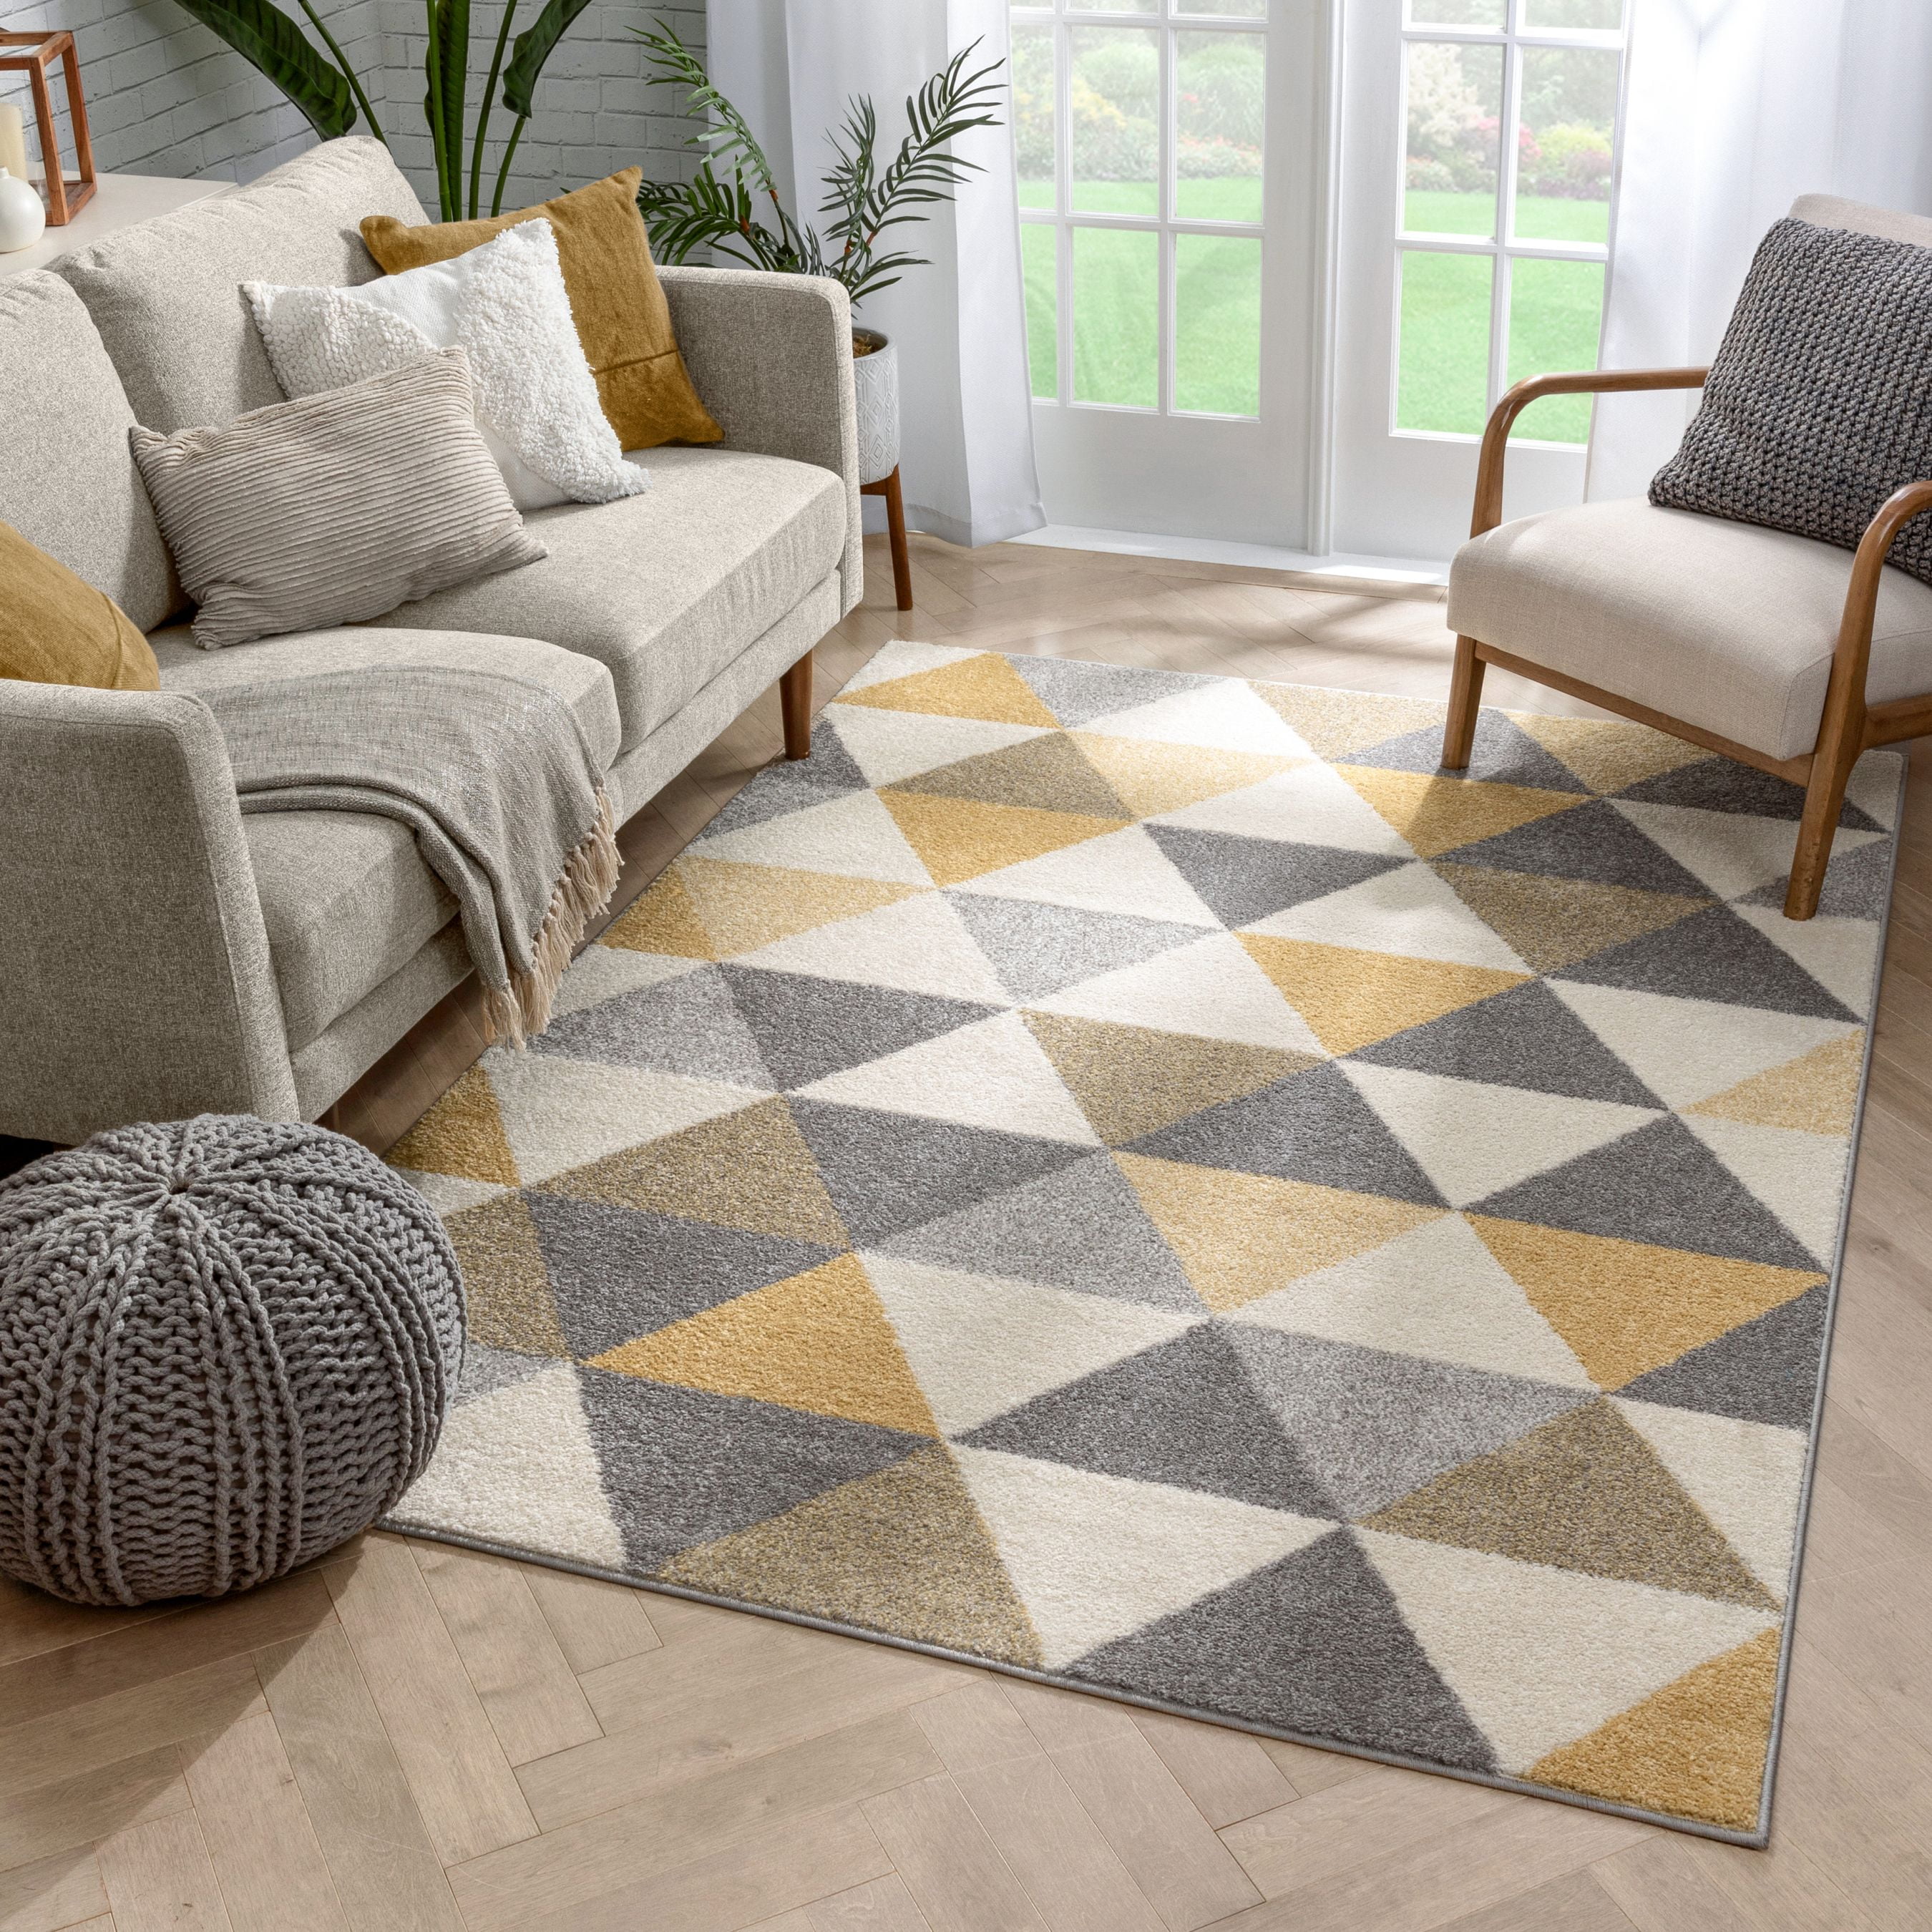 Well Woven Osme Blue & Gold Modern Geometric Boxes & Triangles Beveled Pattern Area Rug 5x7 5'3 x 7'3 